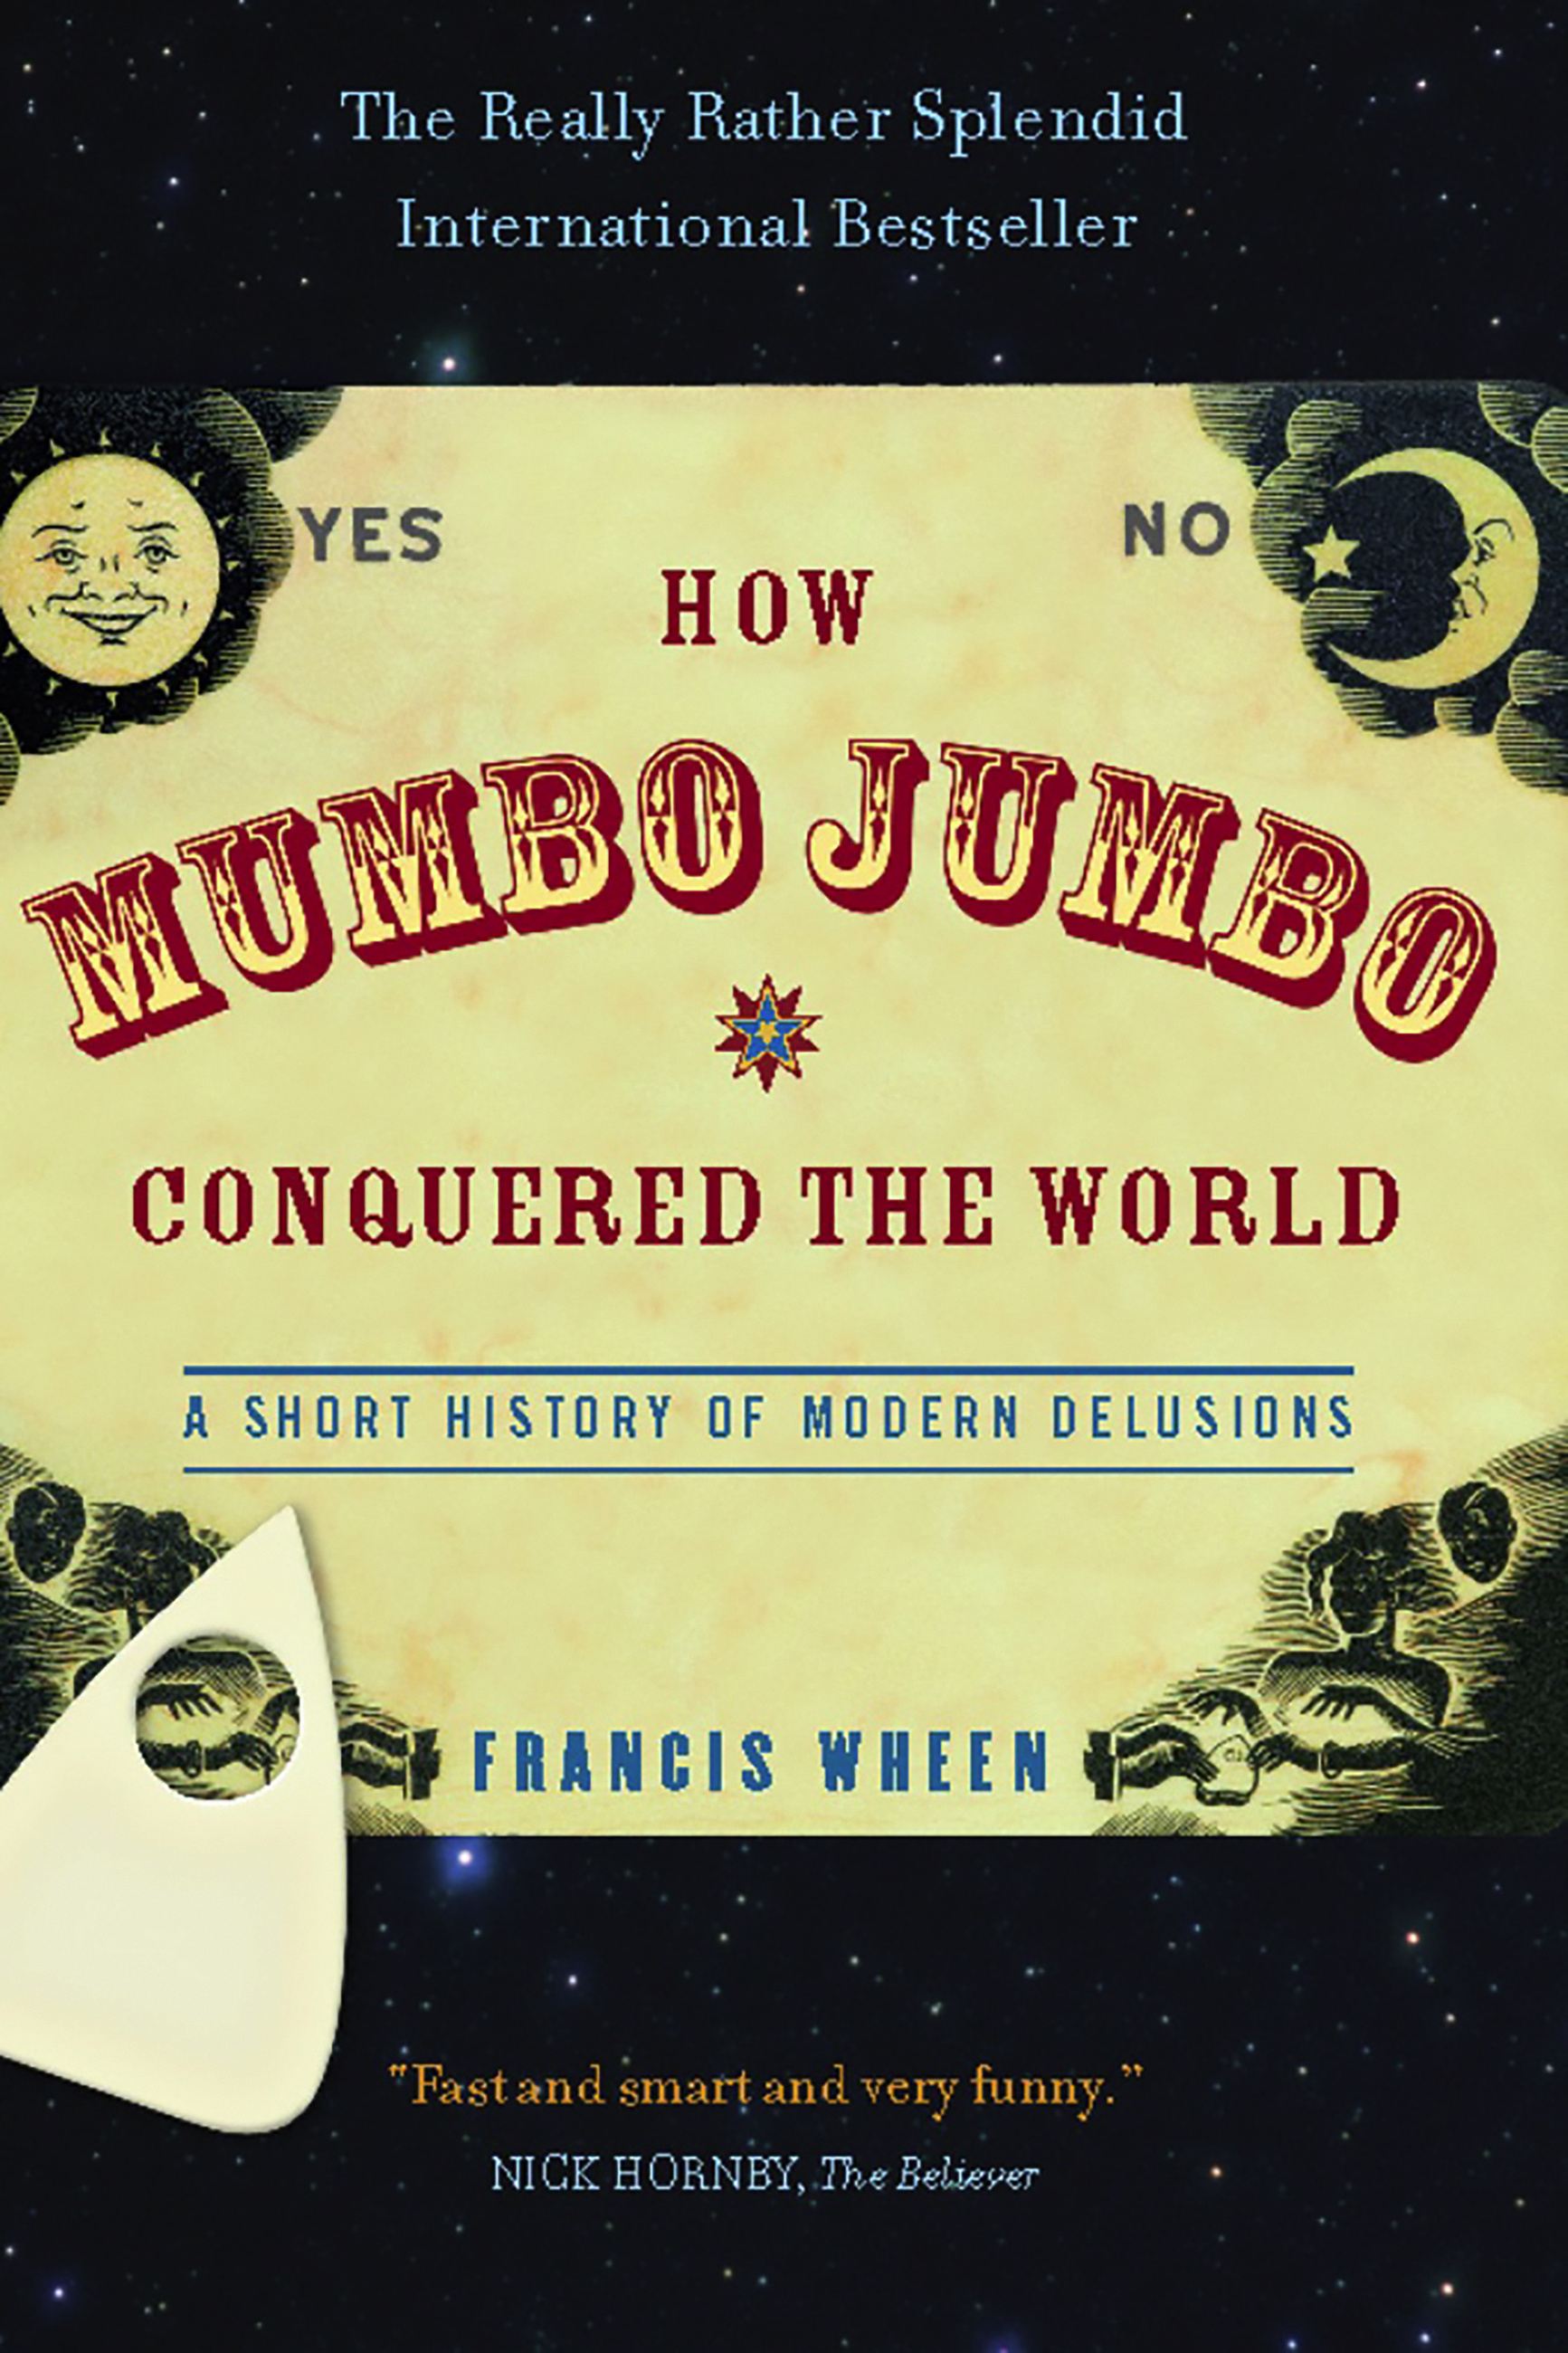 How Mumbo-Jumbo Conquered the World by Francis Wheen | Hachette Book Group